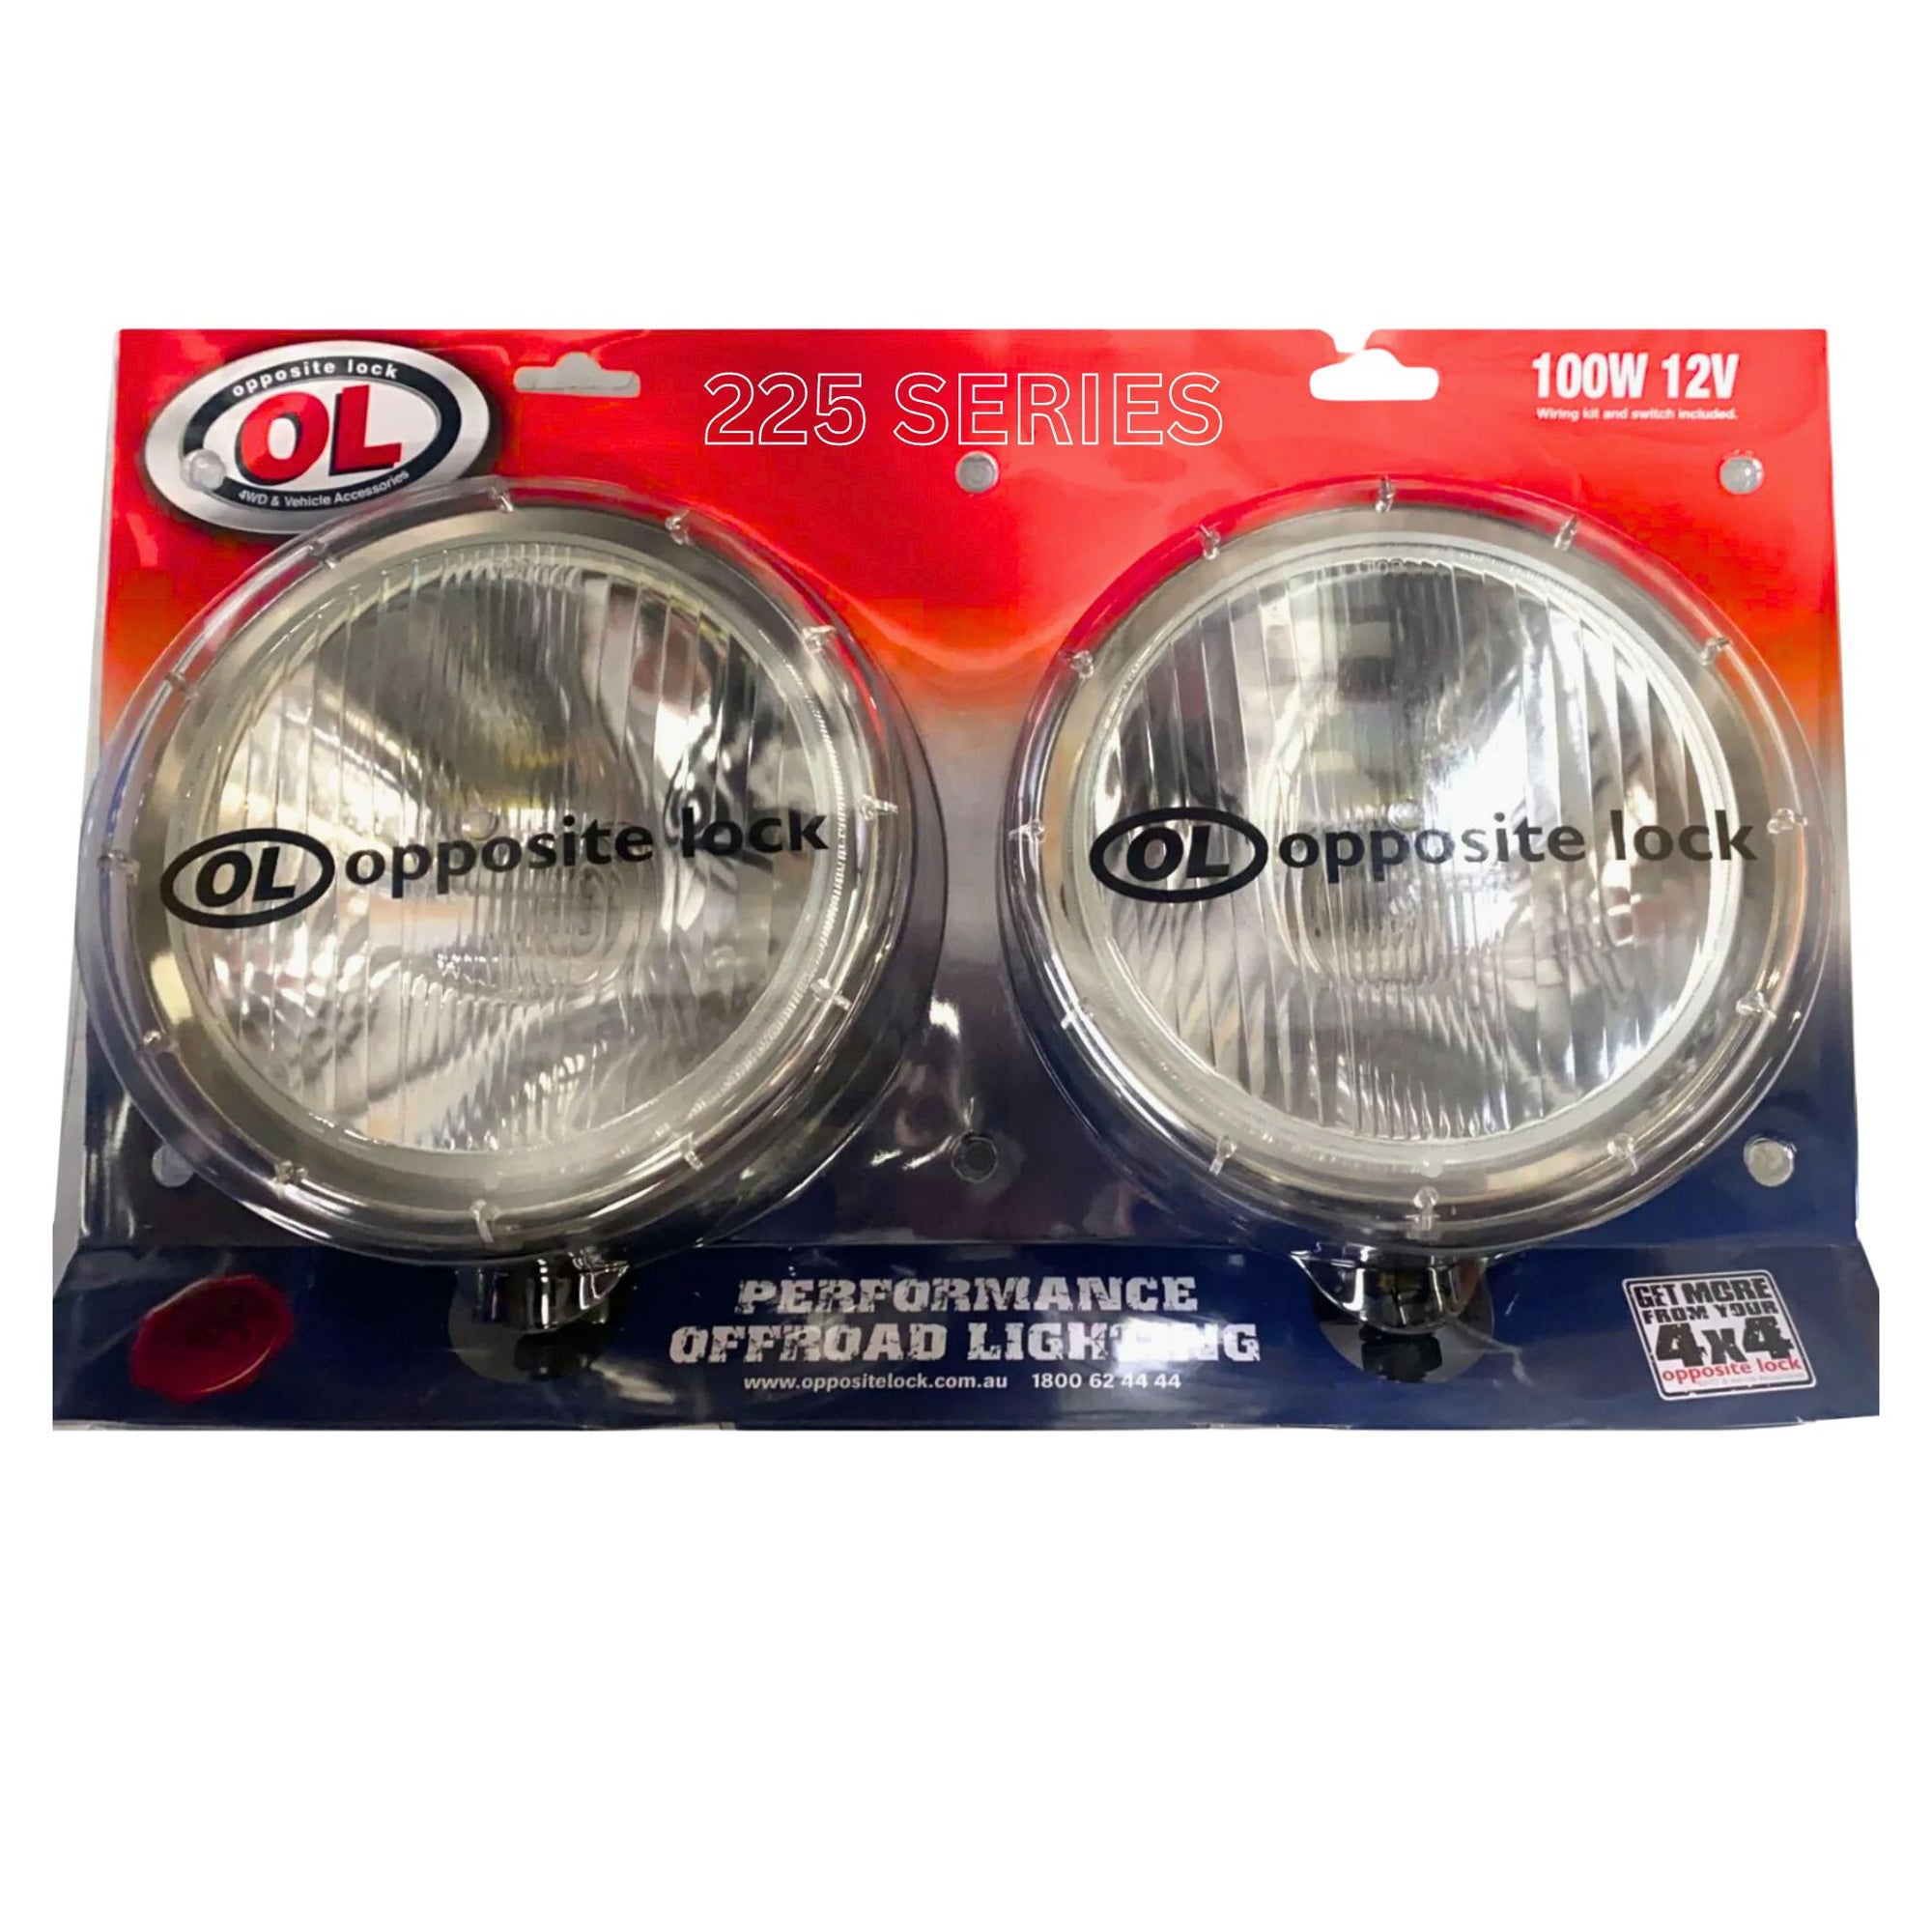 Twin Pack Opposite Lock 225 Series | 100W 12V Driving Light Set - South East Clearance Centre